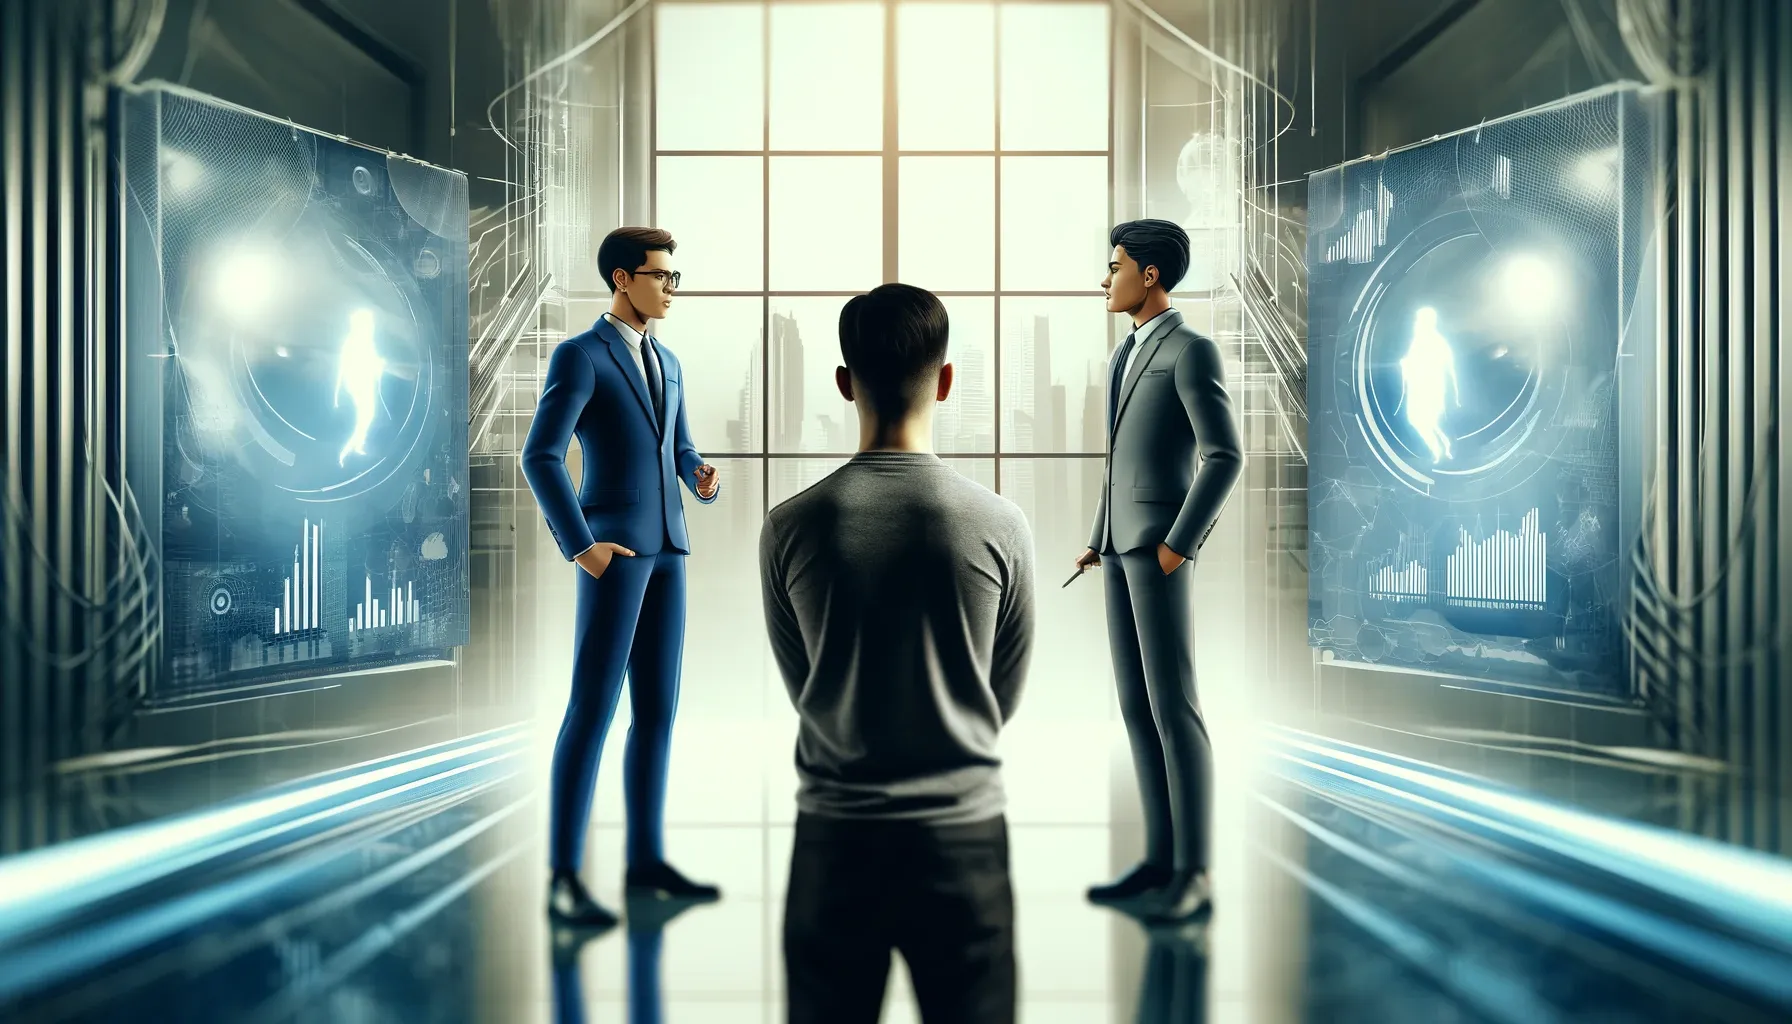 A wide image depicting a person considering two different businessmen. The scene is set in a modern office with a light technology background